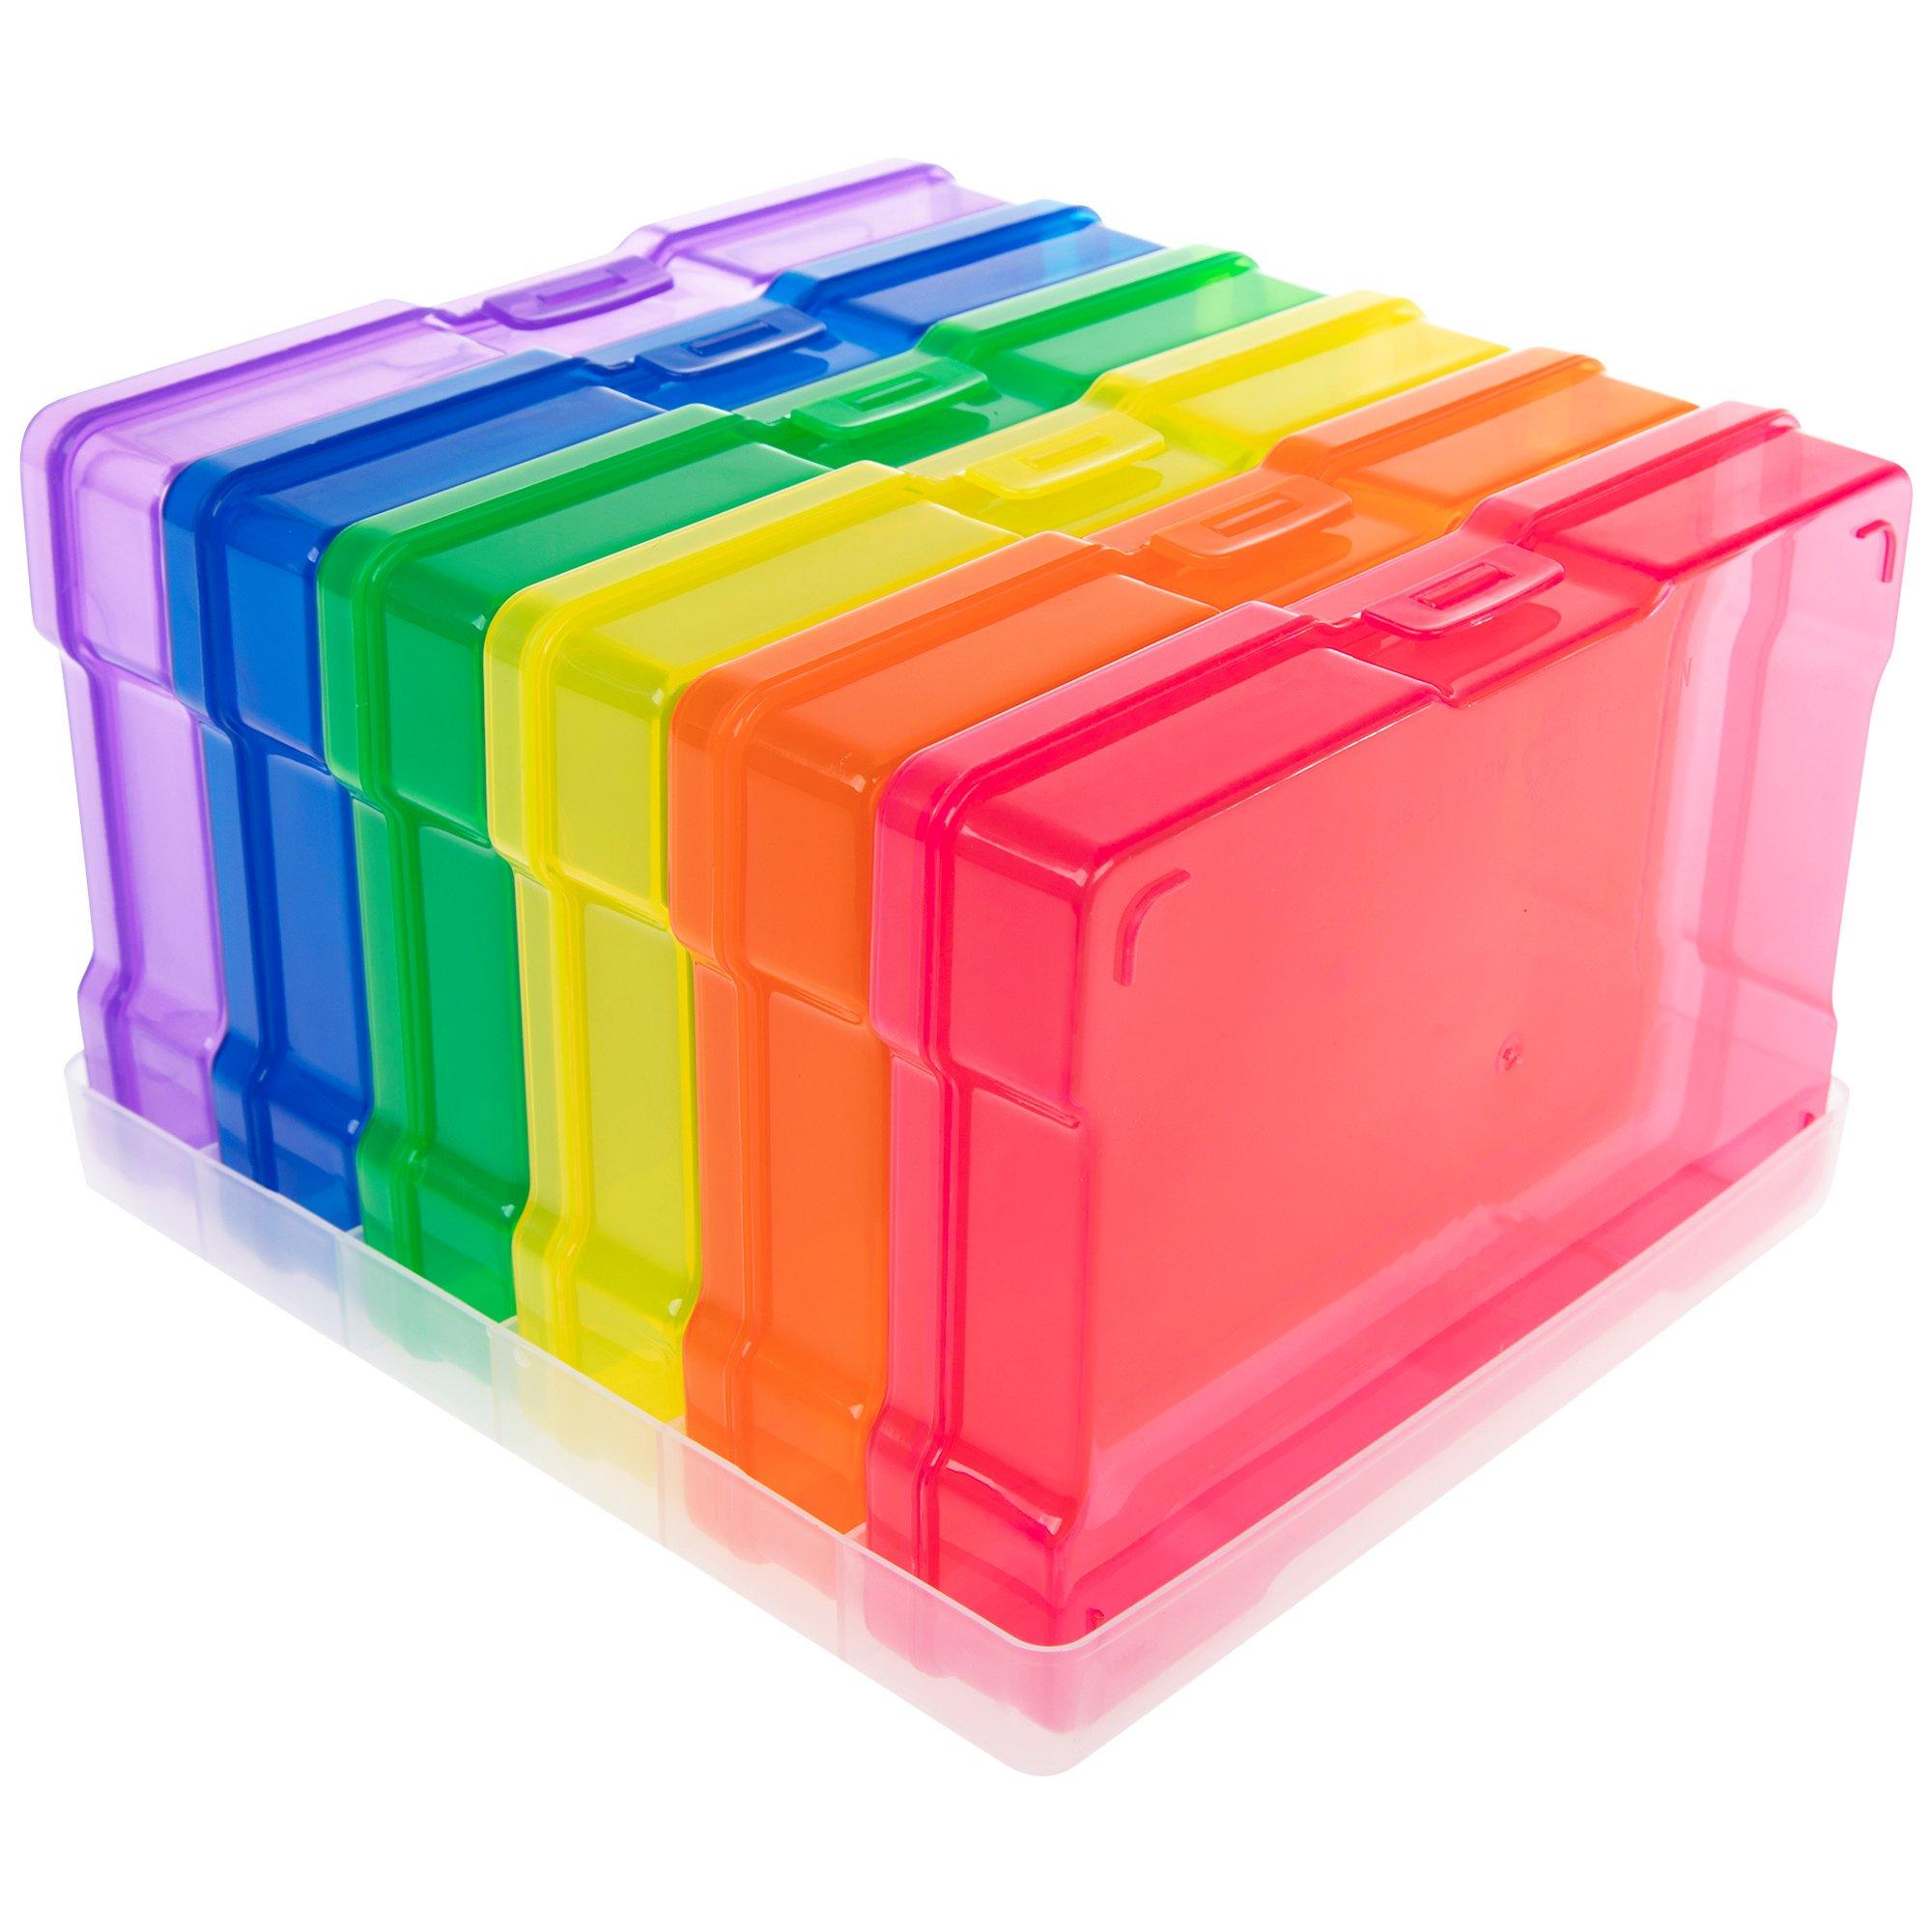 Bright Creations 4 X 6 Inch Photo Storage Box With Handle, 16 Rainbow  Colored Craft Organizers And Storage Cases For Pictures, Cards, 15x12x5 In  : Target